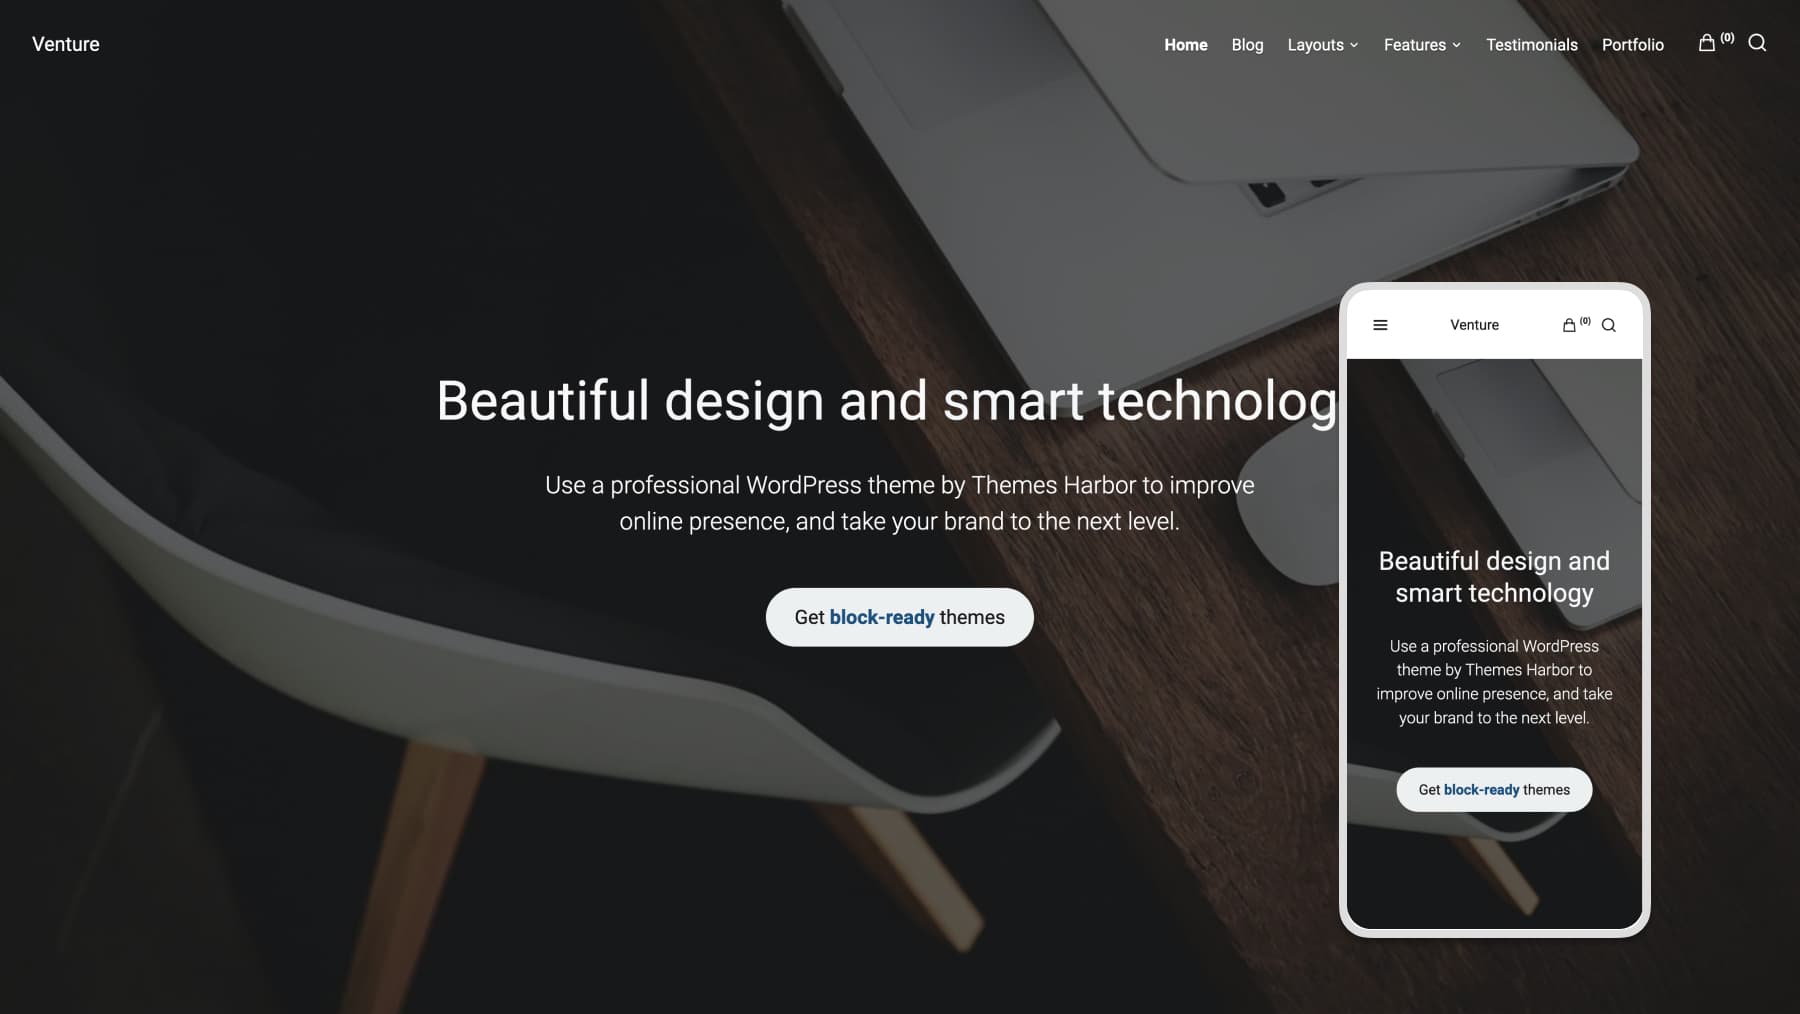 Screenshot of the Venture theme for WordPress by Themes Harbor